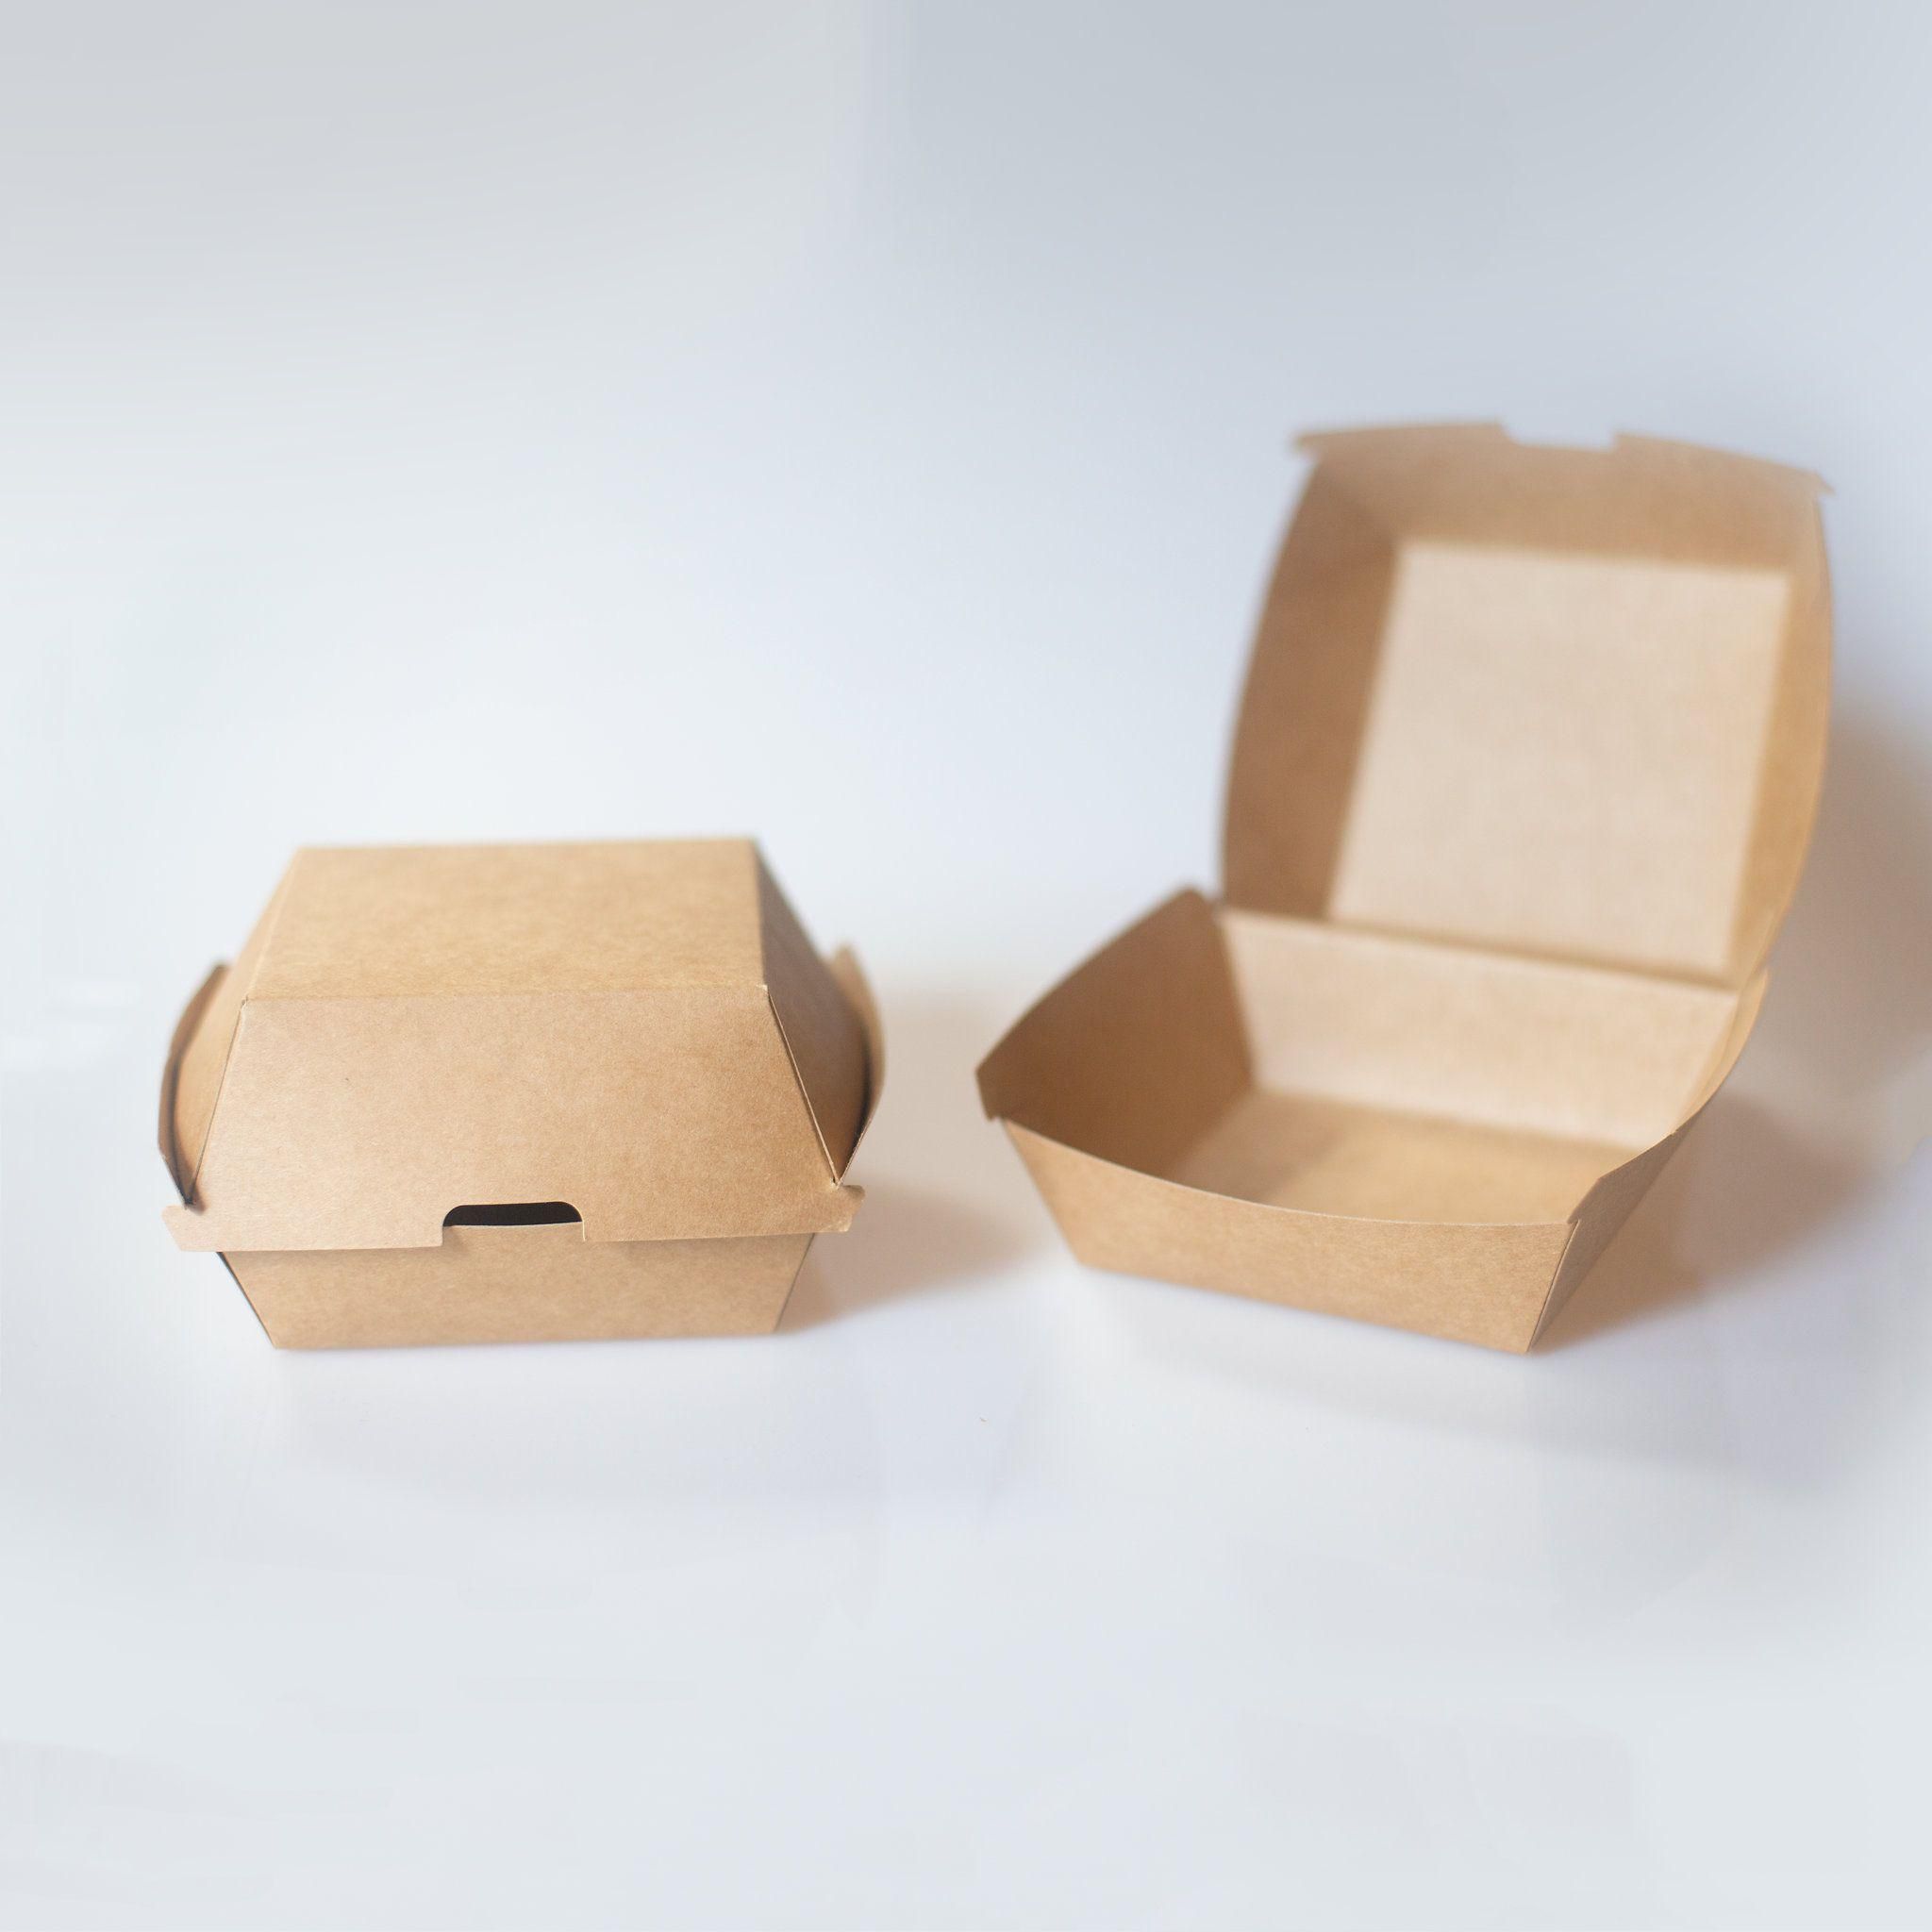 How to Find an Expert Packaging Manufacturer for Burger Boxes?